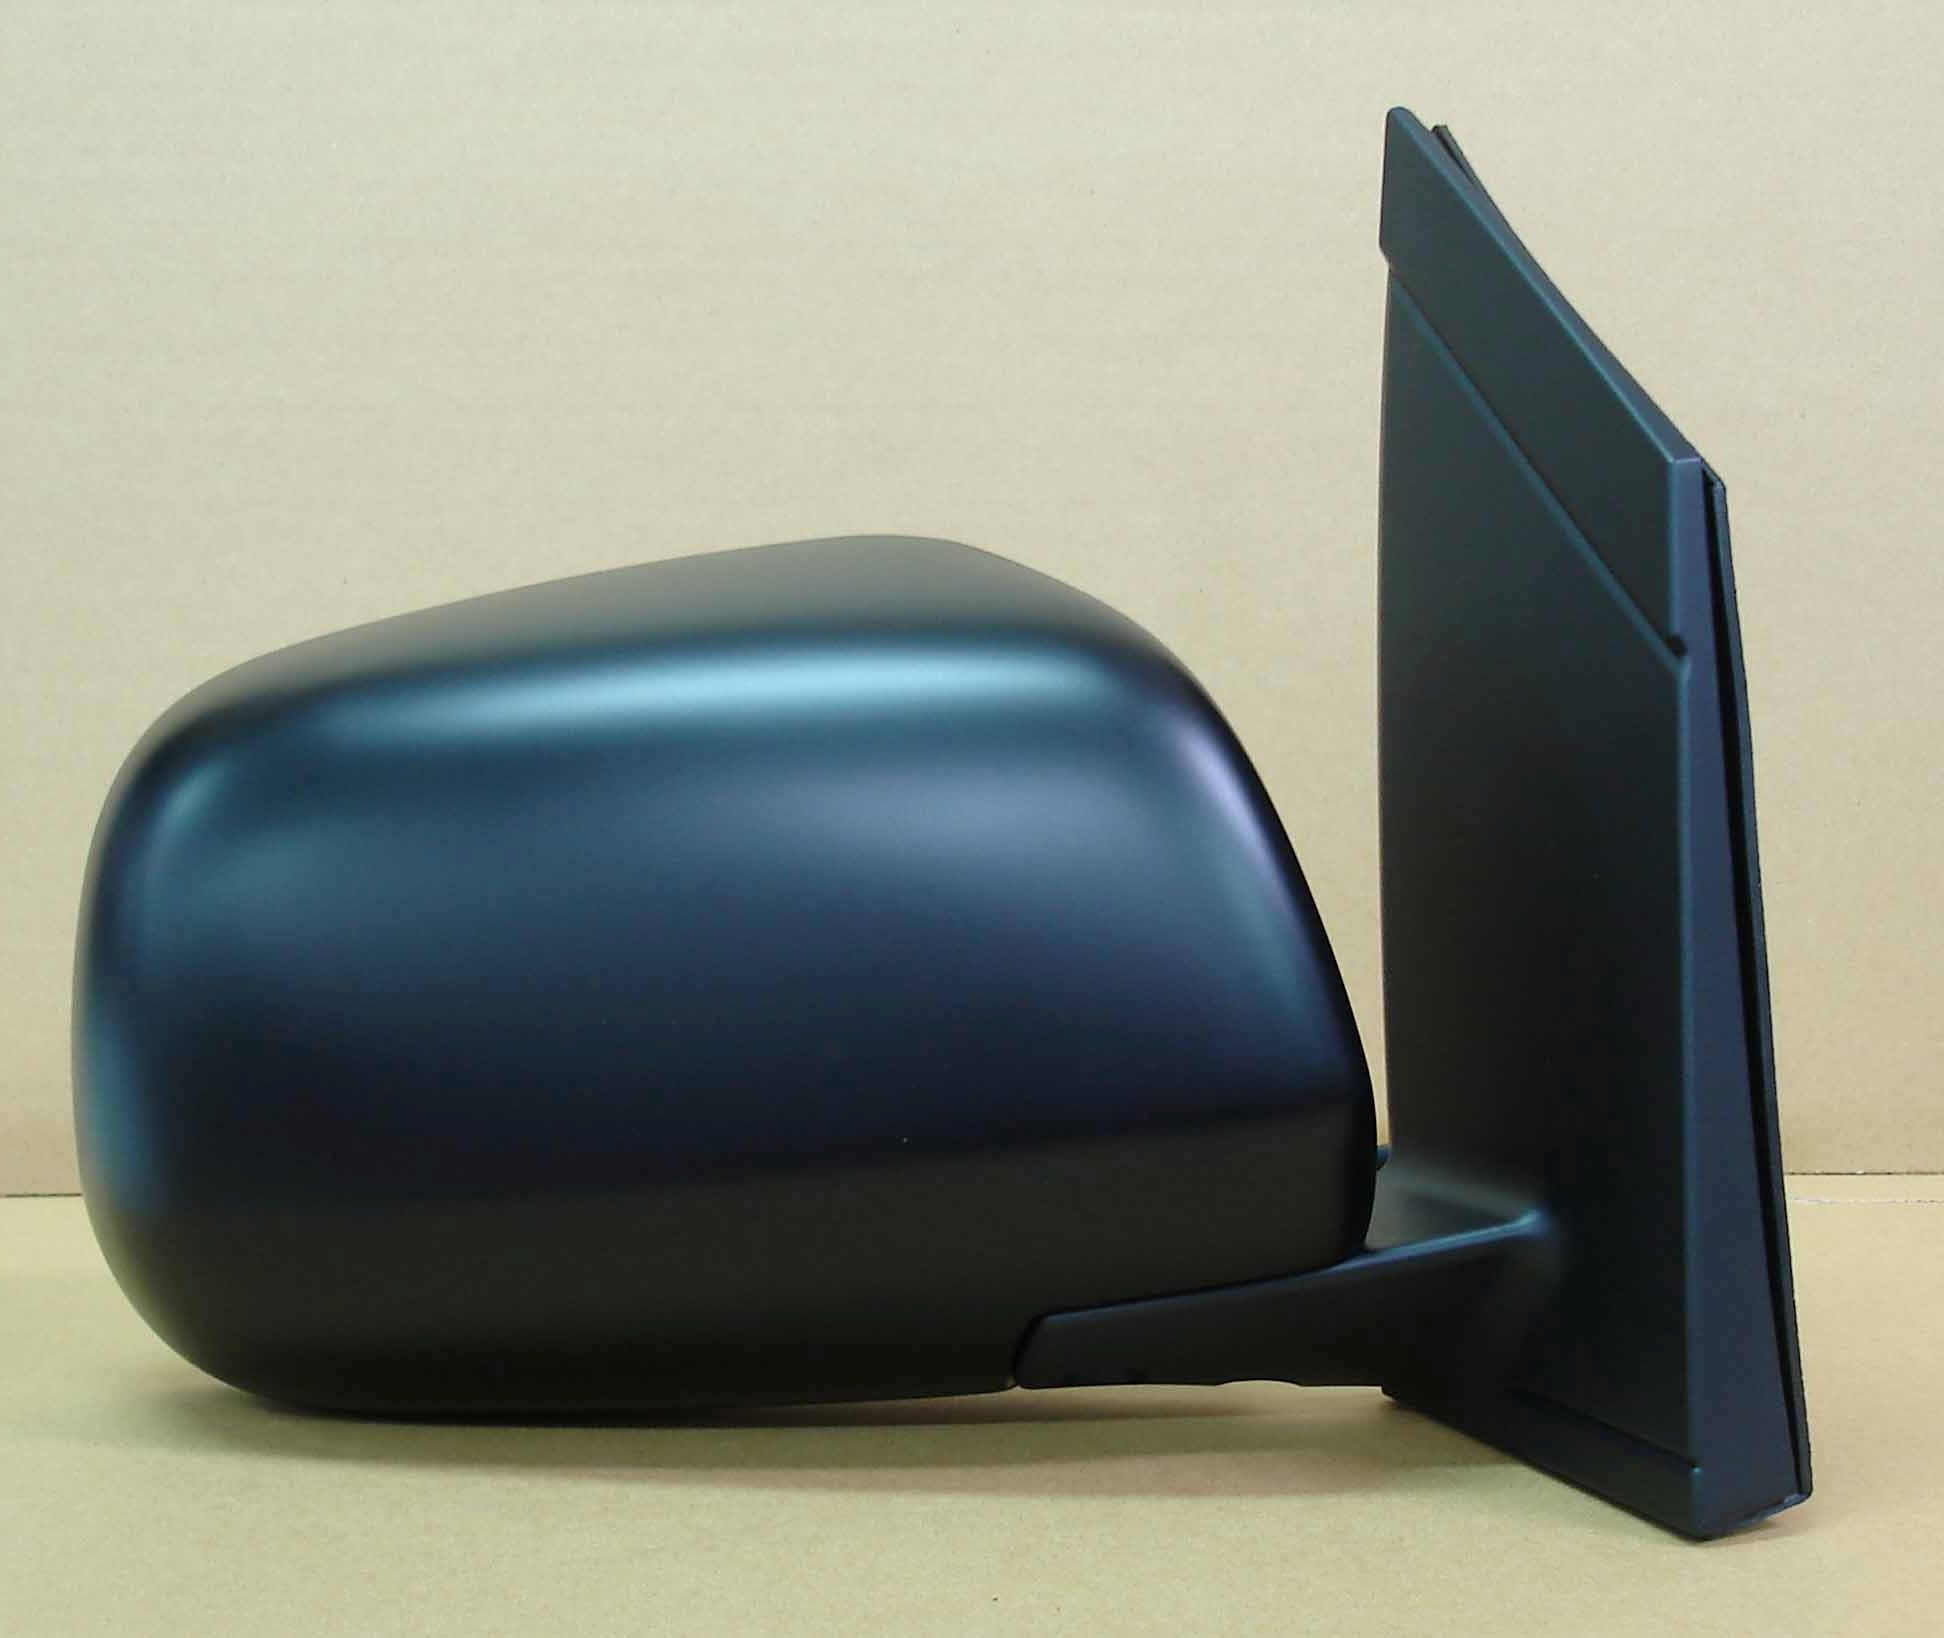 Aftermarket MIRRORS for TOYOTA - SIENNA, SIENNA,04-10,RT Mirror outside rear view